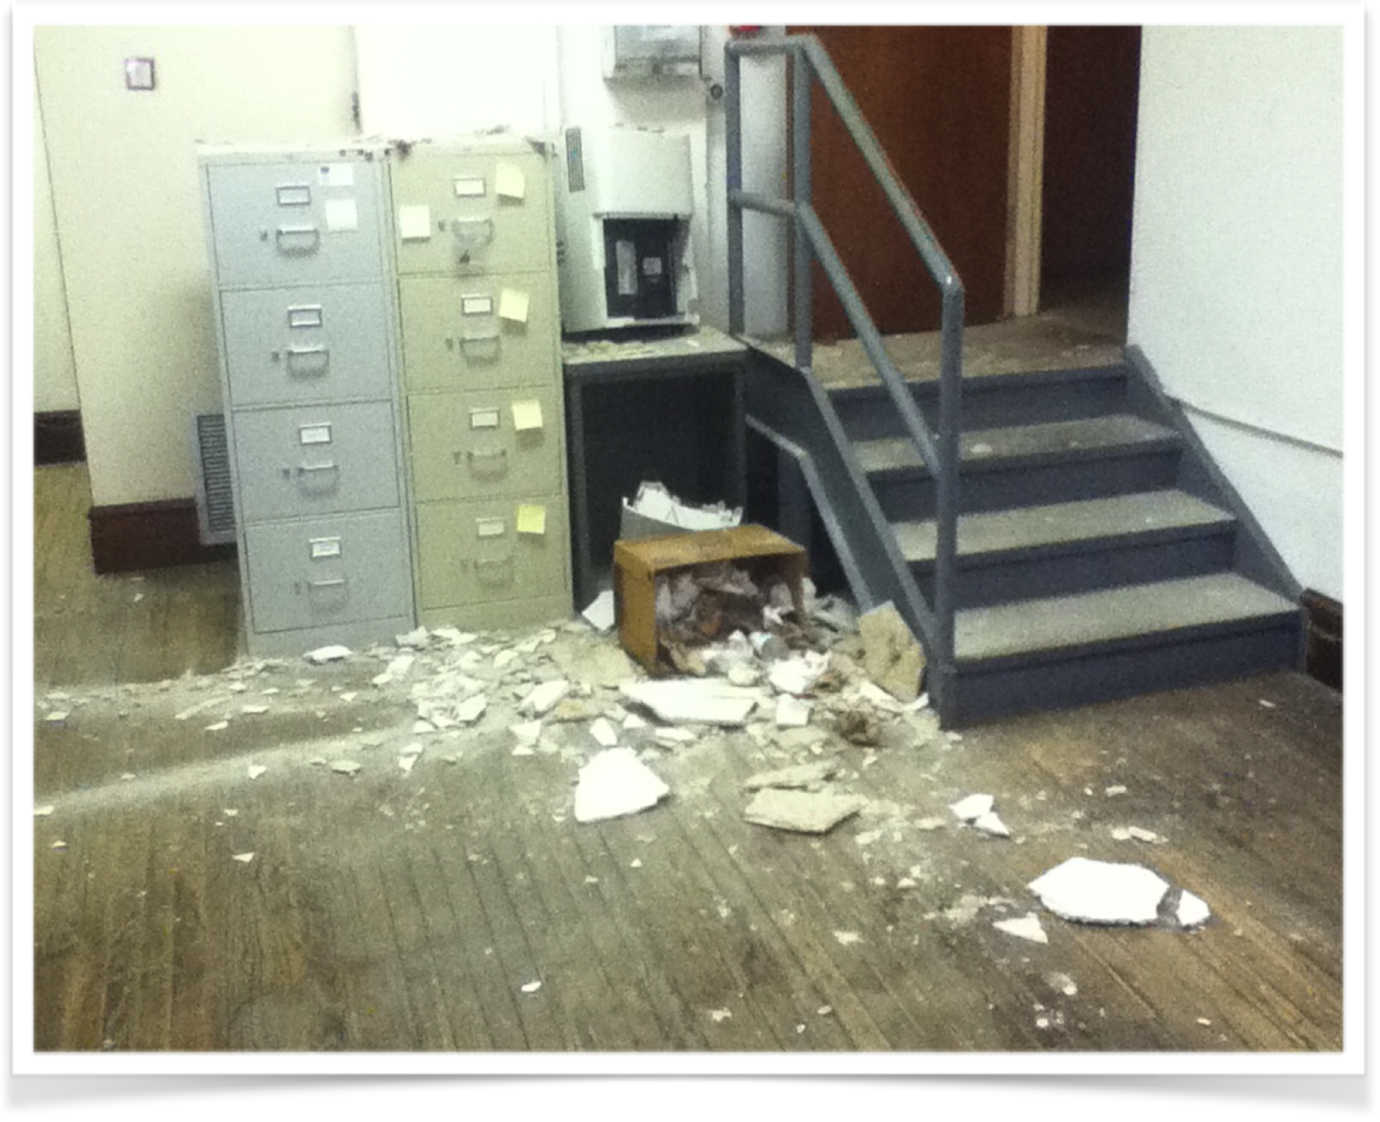 Before the grant, the archives had descended into disorganization and disrepair. Photo Courtesy of Governor's House Libraries.